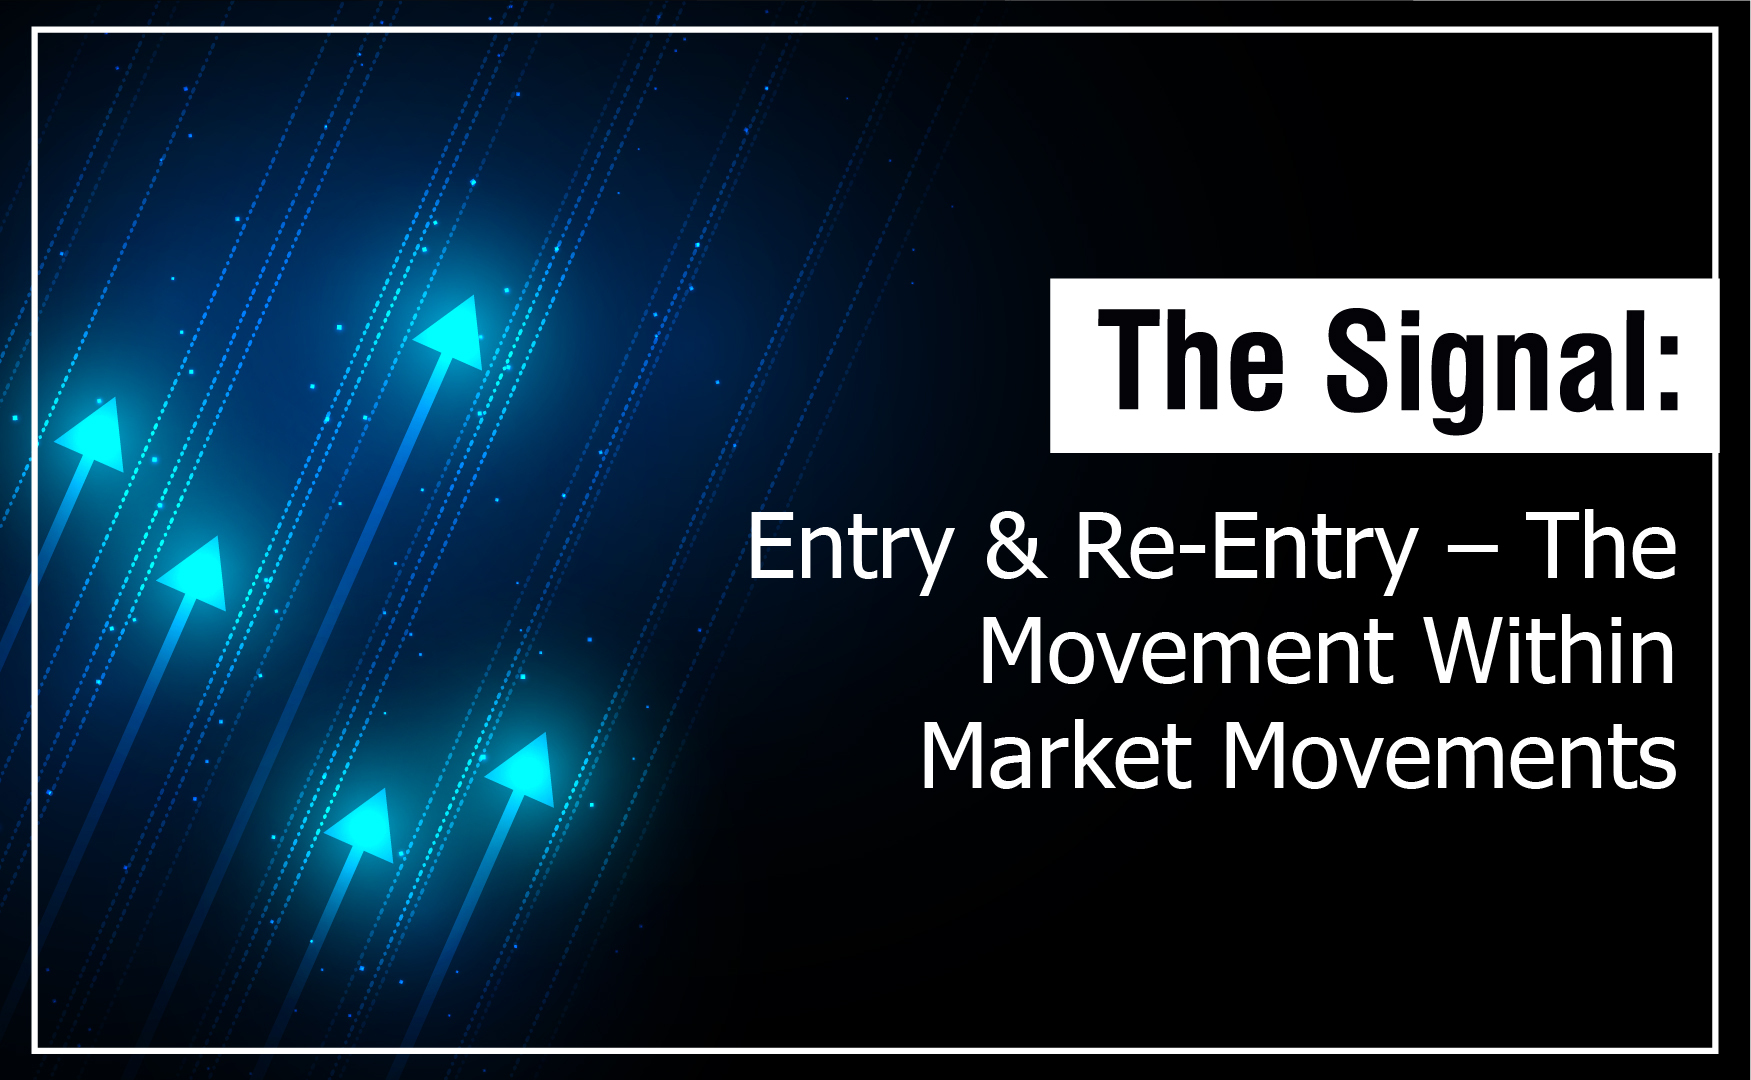 The Signal: Entry & Re-Entry – The Movement Within Market Movements